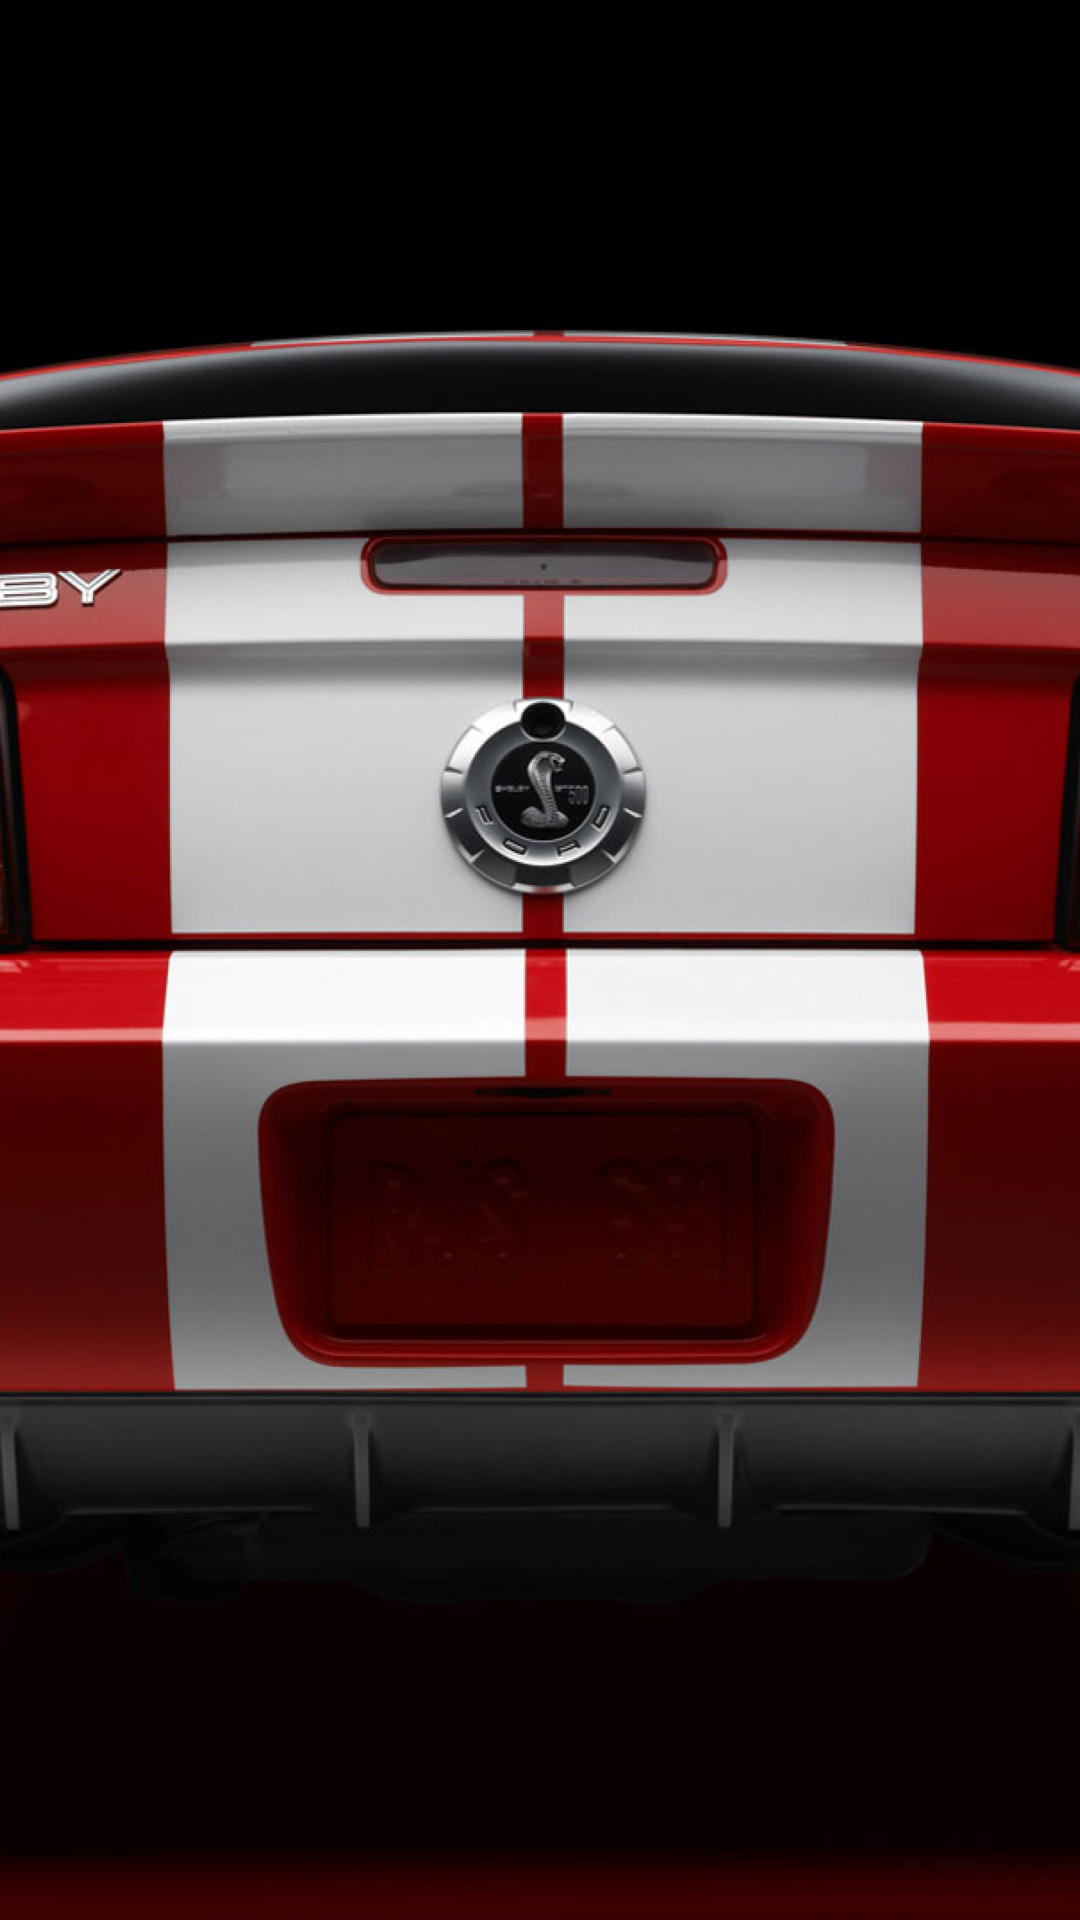 Ford Mustang Shelby GT500 wallpaper 1080x1920